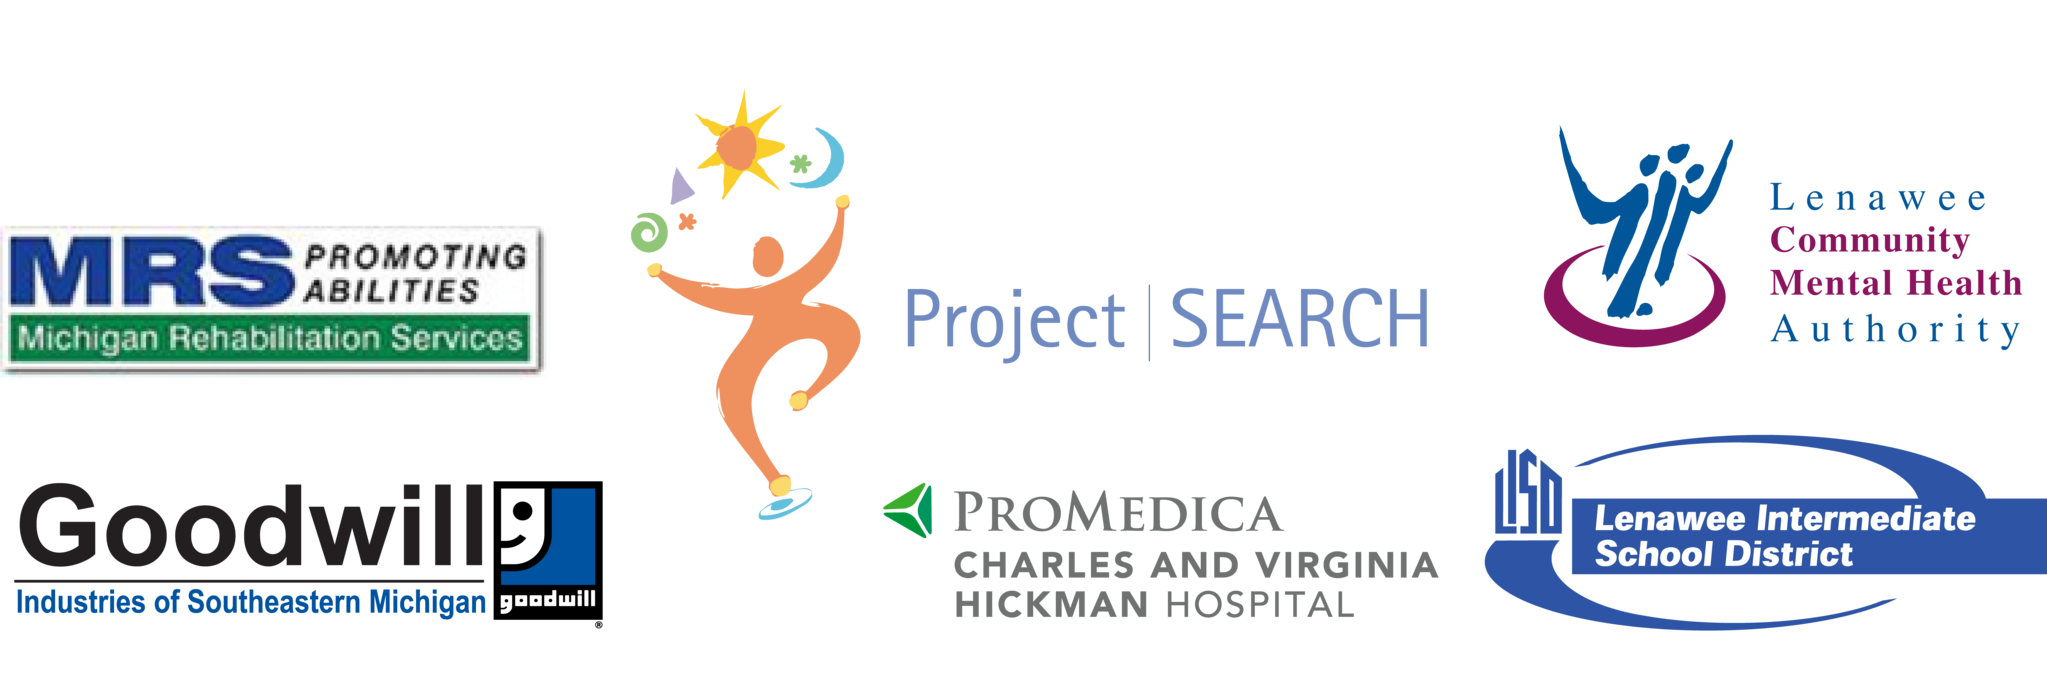 Logo Banner for Project SEARCH partners: Michigan Rehabilitation Services, Goodwill Industries of Southeastern Michigan, ProMedica Charles and Virginia Hickman Hospital, Lenawee Community Mental Health, and LISD